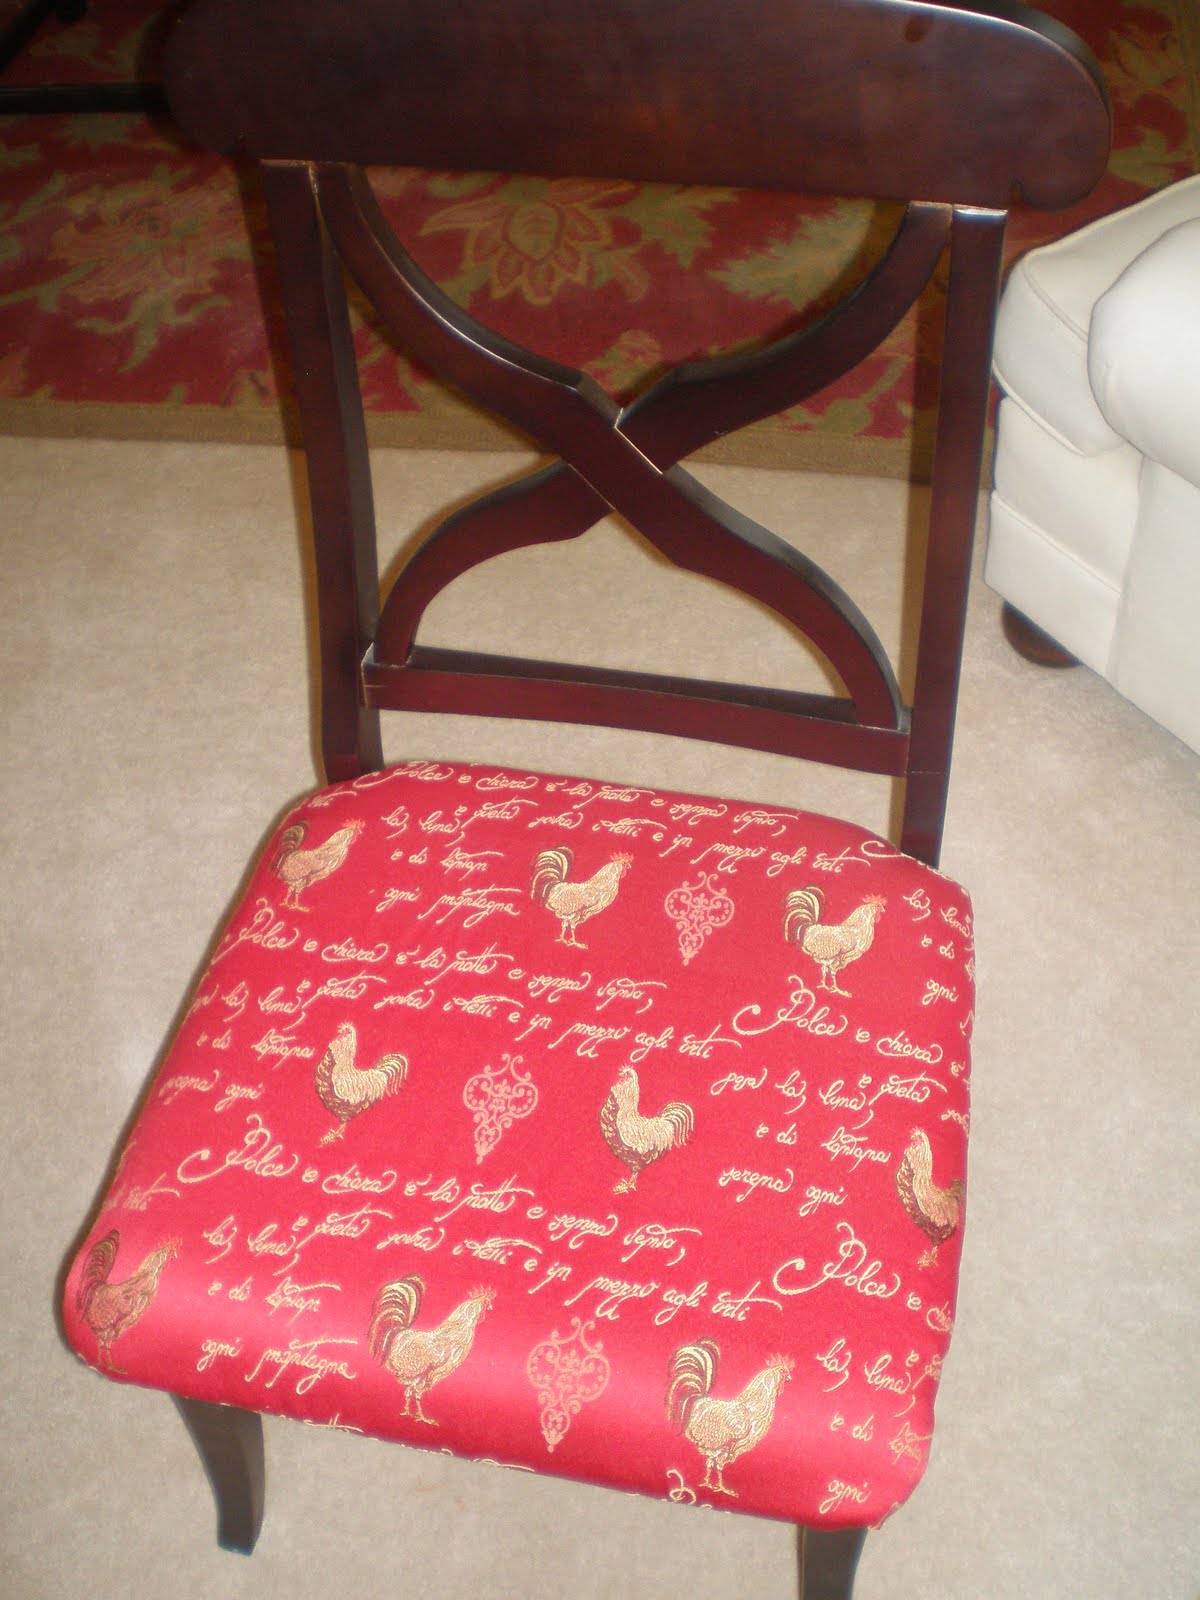 11 Simple Steps to Recover Dining Room Chairs - Yahoo! Voices